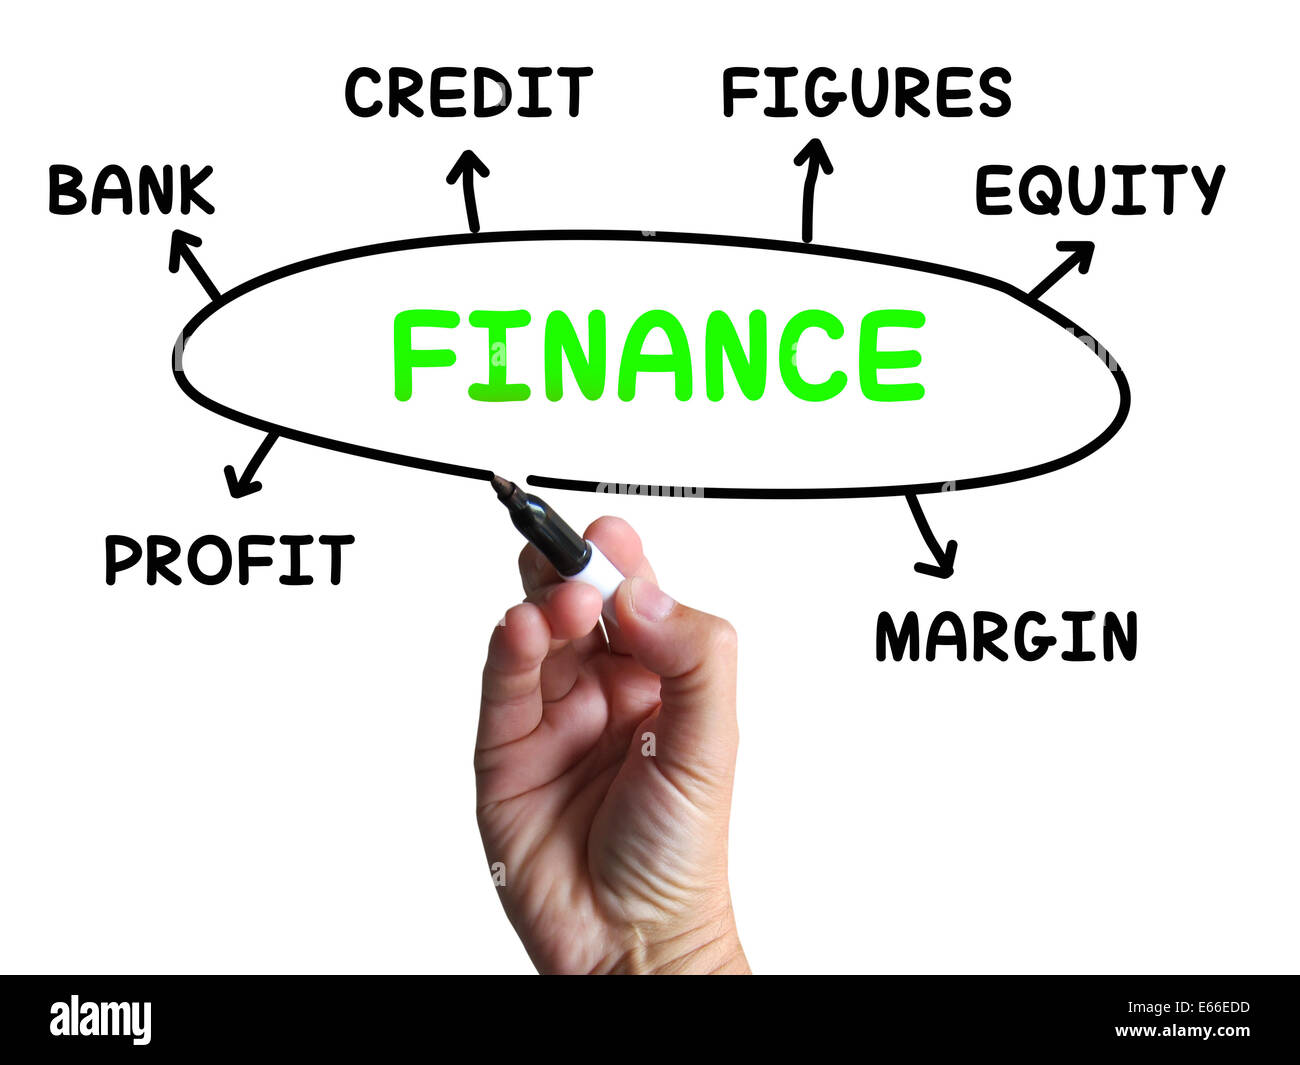 Finance Diagram Showing Credit Equity And Margin Stock Photo